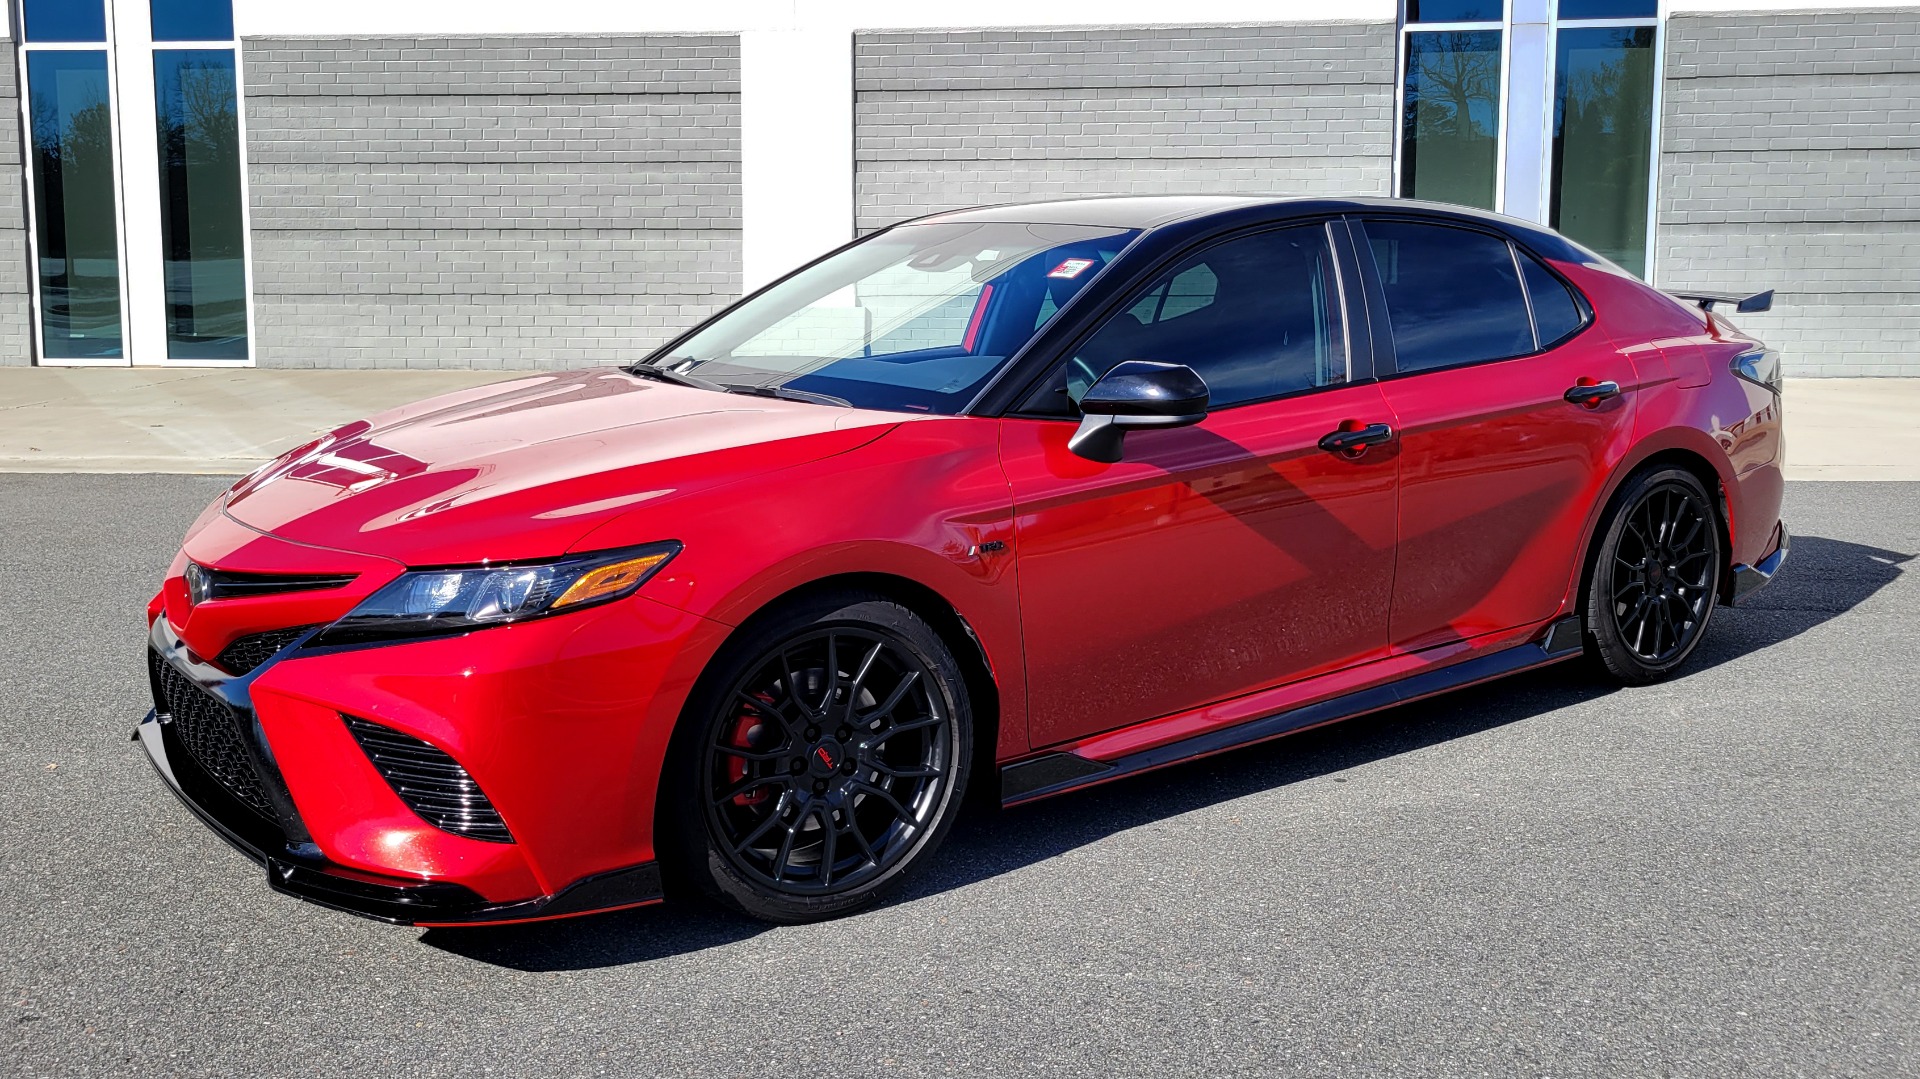 Used 2020 Toyota CAMRY TRD 3.5L V6 SEDAN / 8-SPEED AUTO / CLOTH SEATS / REARVIEW for sale $35,995 at Formula Imports in Charlotte NC 28227 2